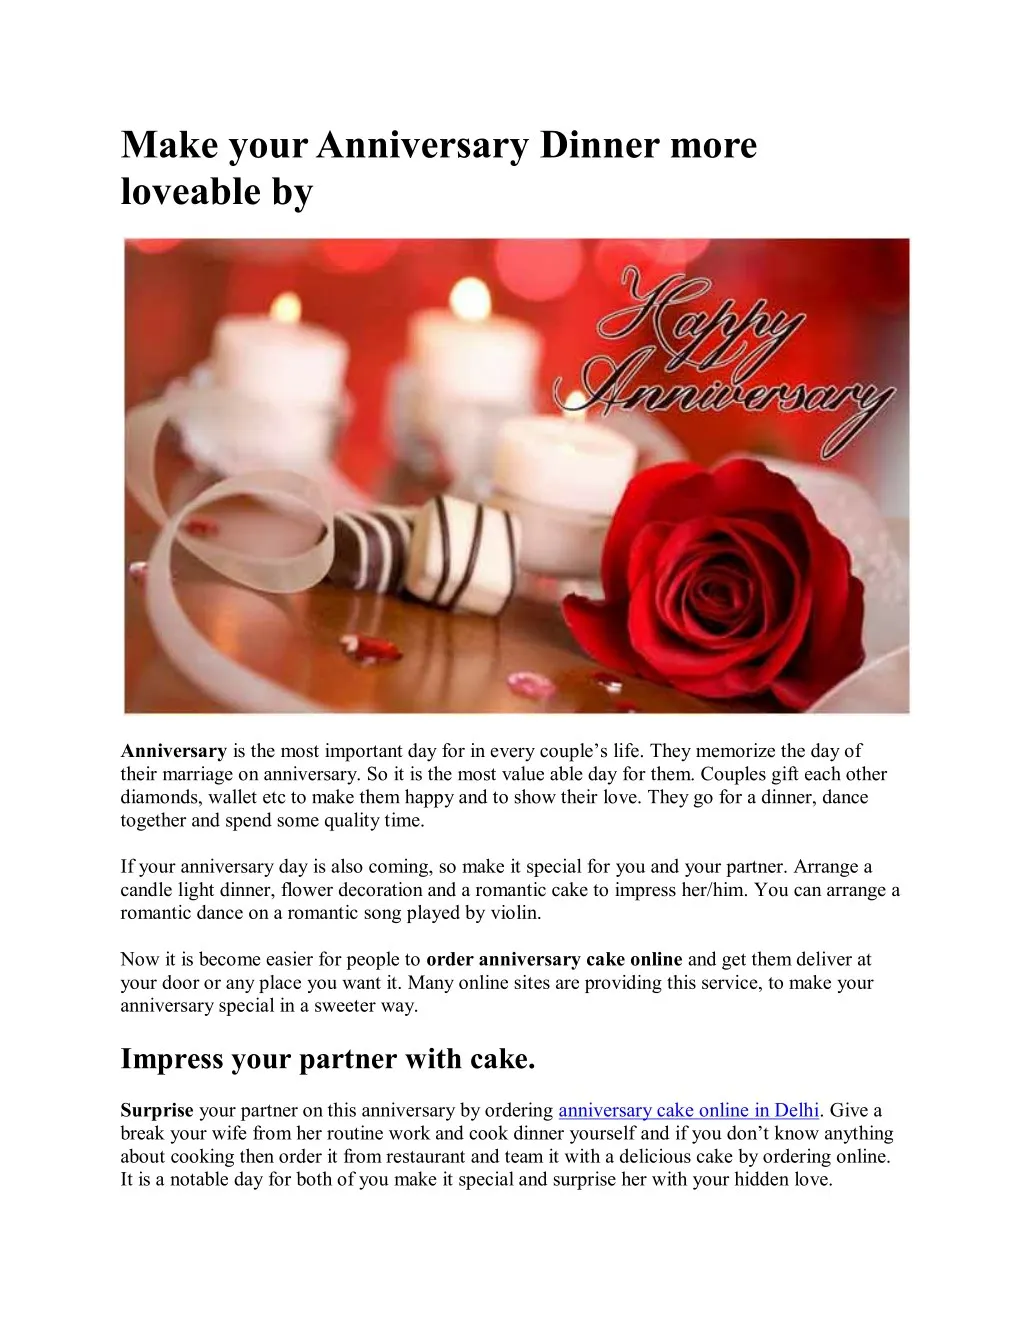 make your anniversary dinner more loveable by